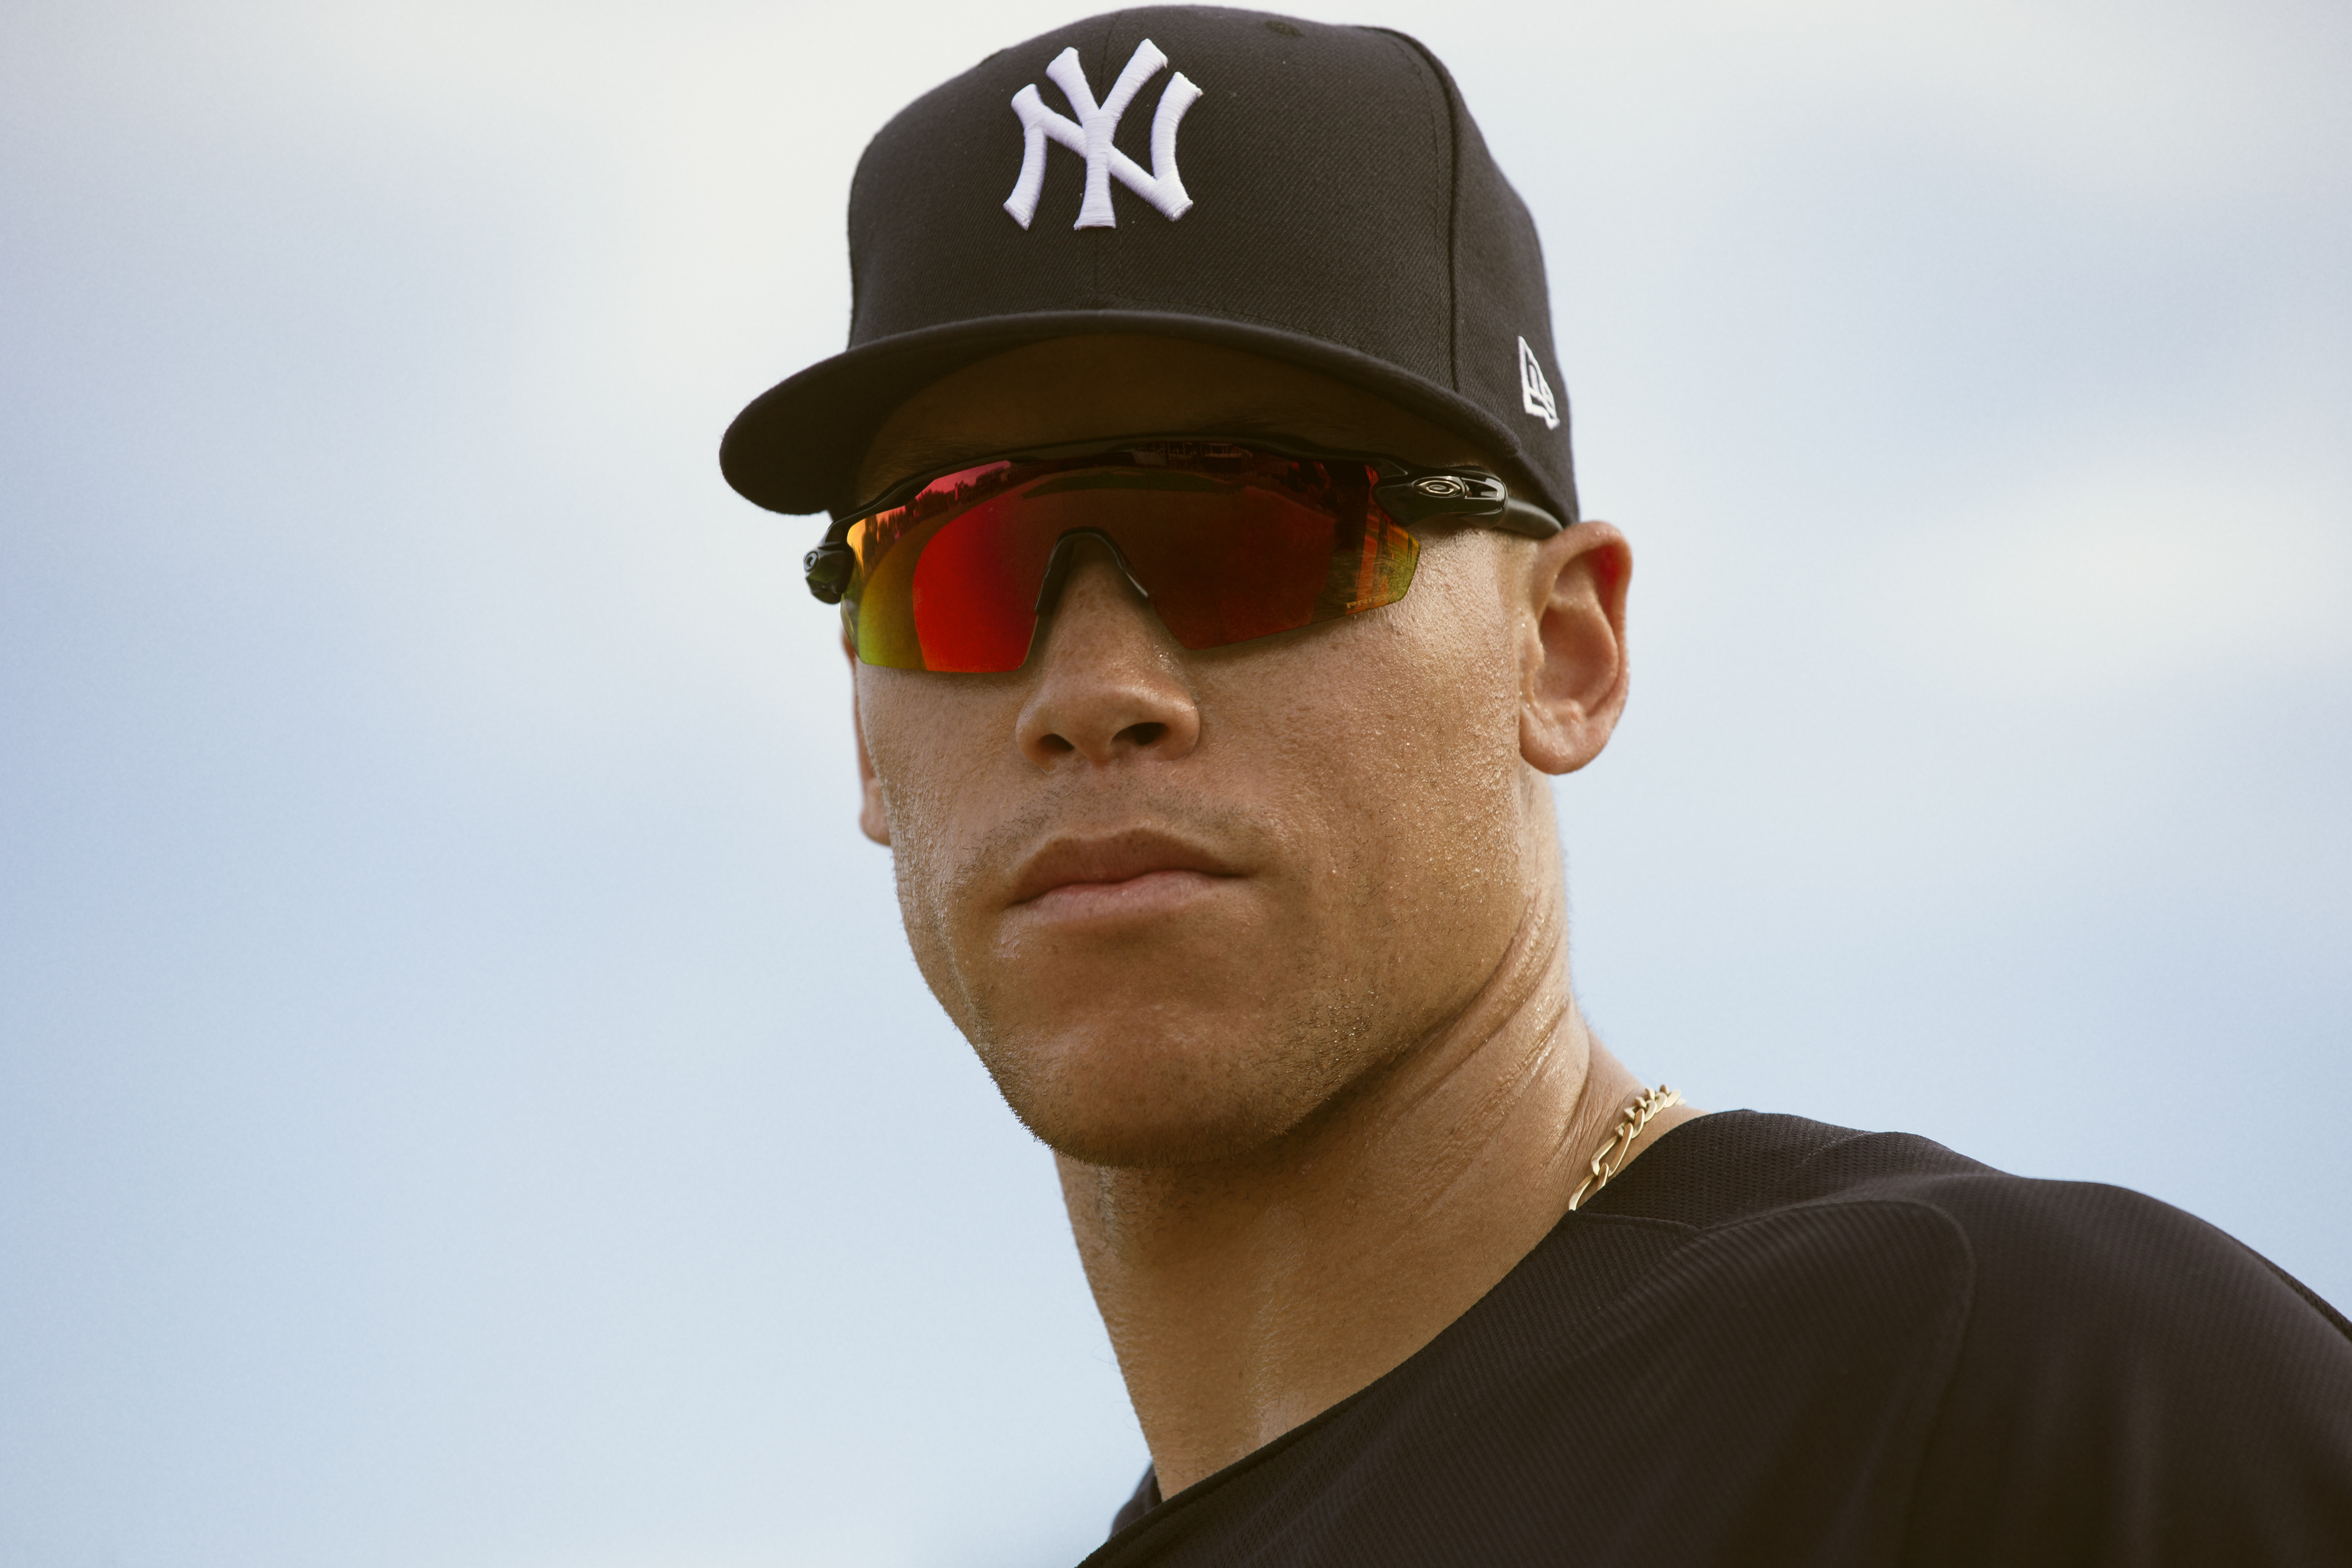 Oakley Baseball Sunglasses Buyer's Guide | SportRx.com - Transforming your  visual experience.